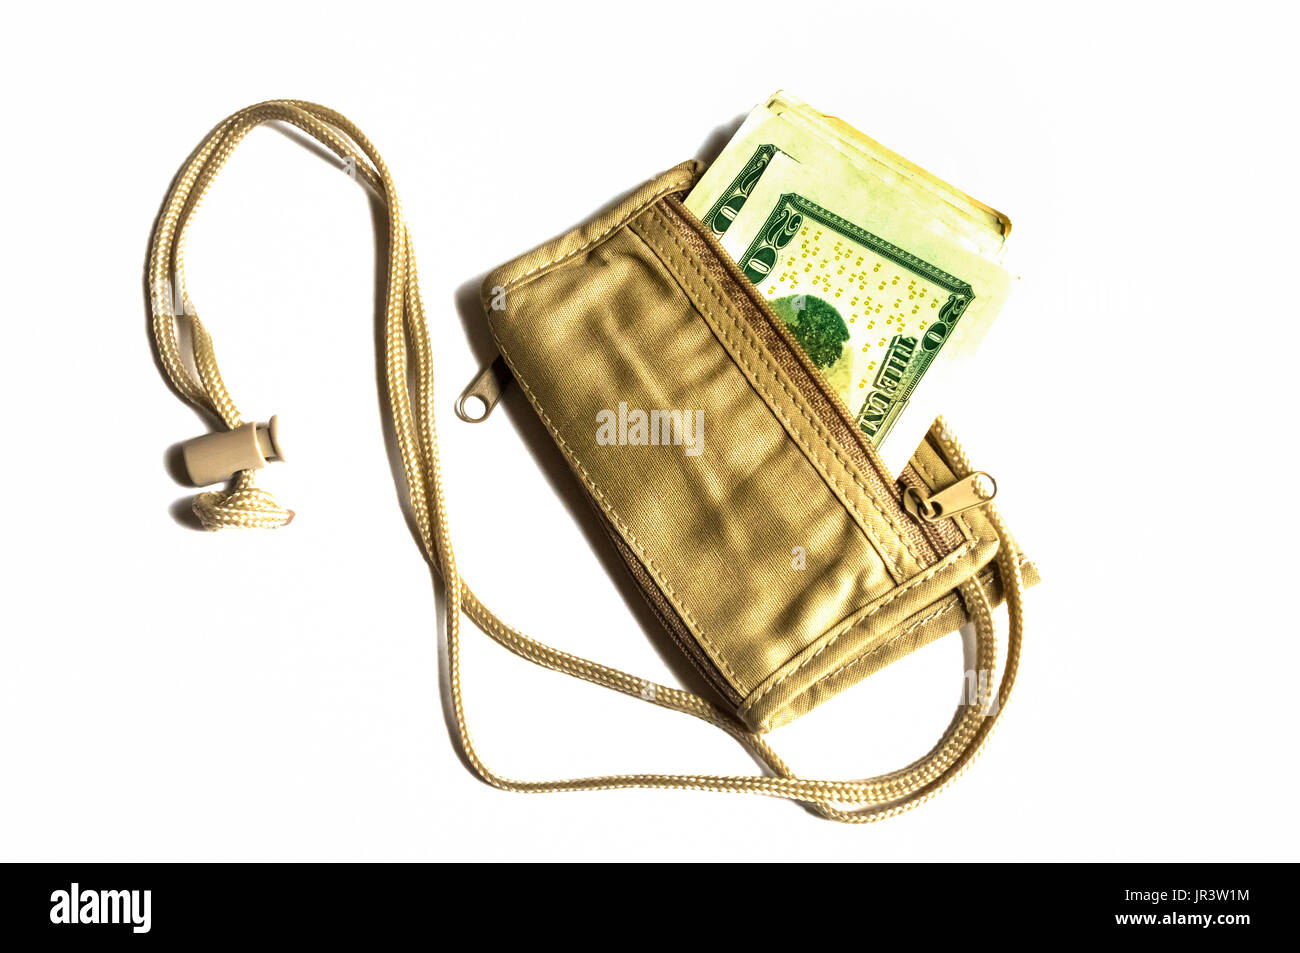 A tan neck wallet filled with US bank notes on a white background Stock Photo